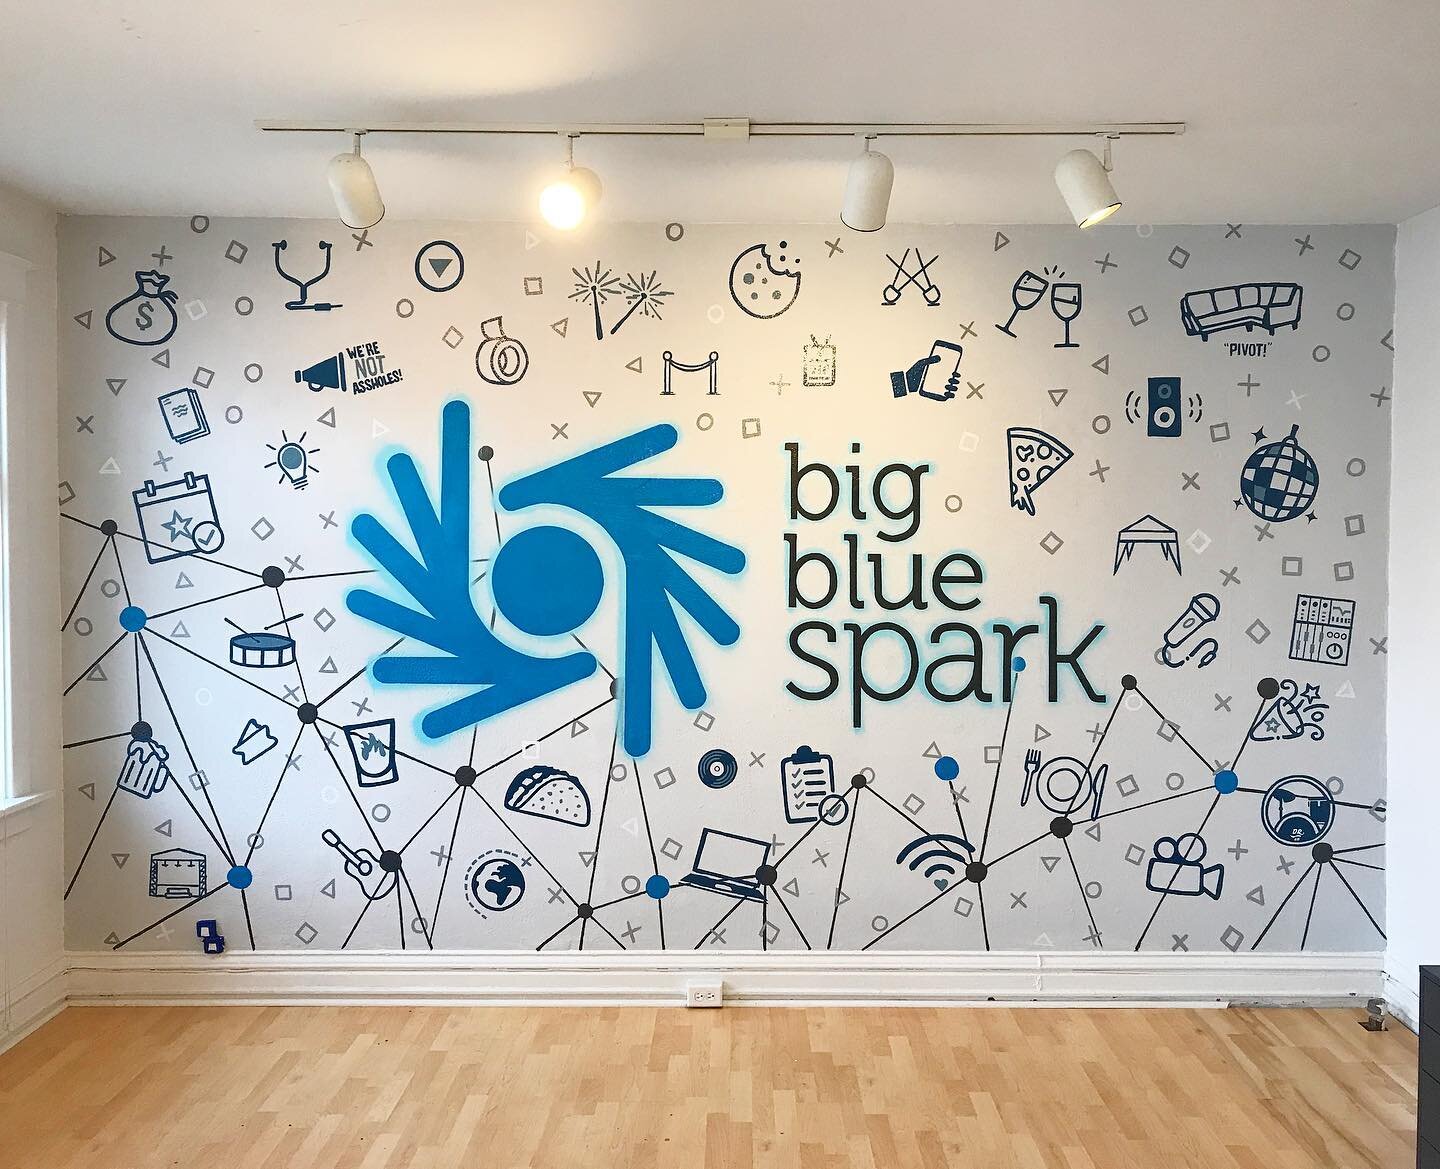 Had a great time painting @bigbluespark &lsquo;s new office mural this week. Big shout out to @kylelewsader for his design work. 

#stlouissignandmural #bigbluespark #stlouis #officemural #handpainted #artwork #signpainter #muralist #stl #localartist